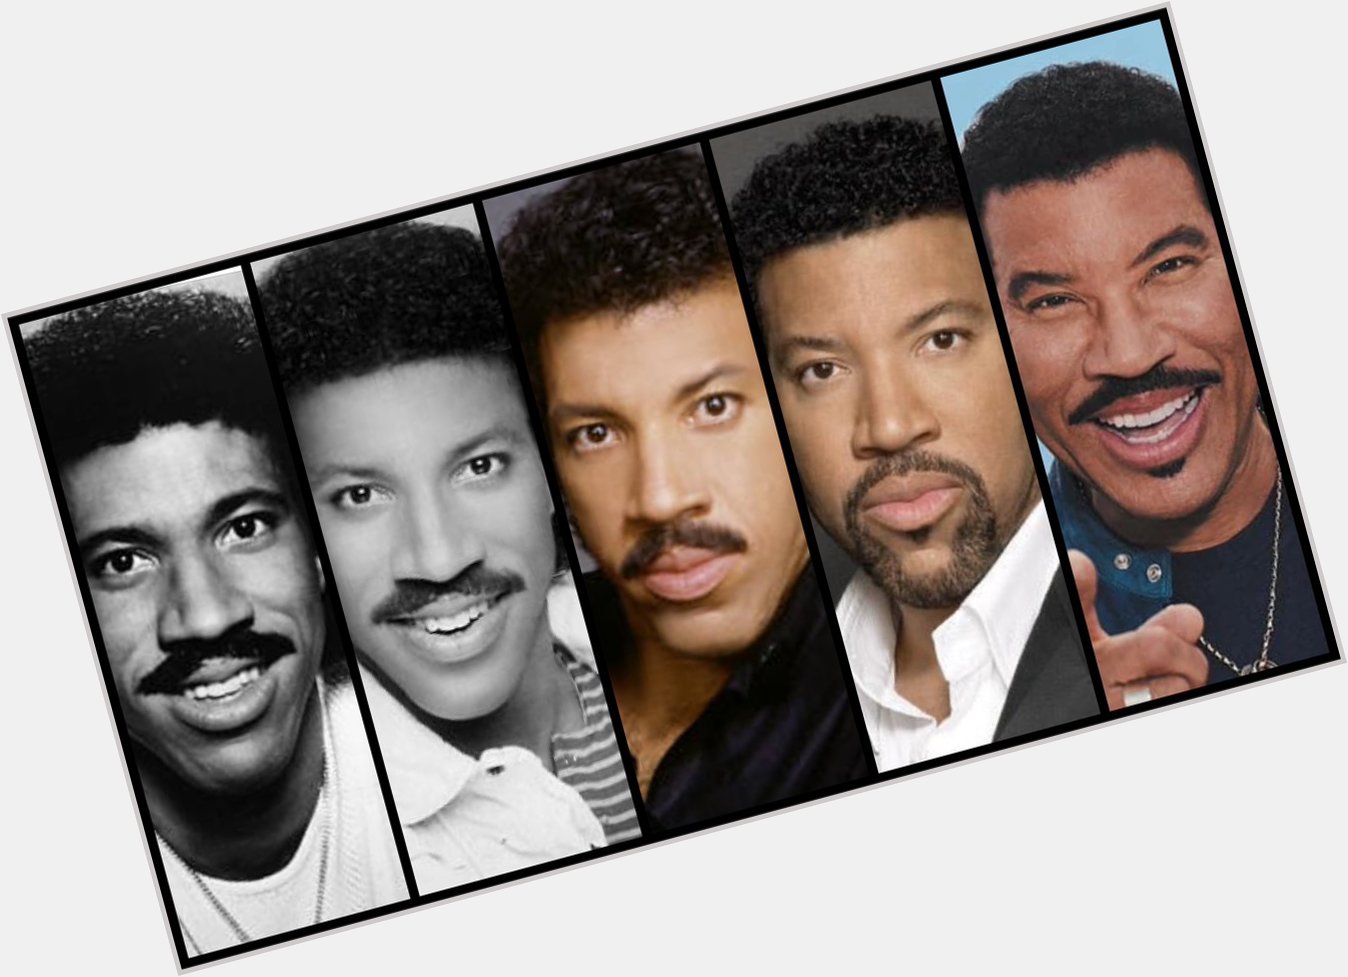 Happy Birthday Lionel Richie (June 20, 1949) singer of The Commodores. 